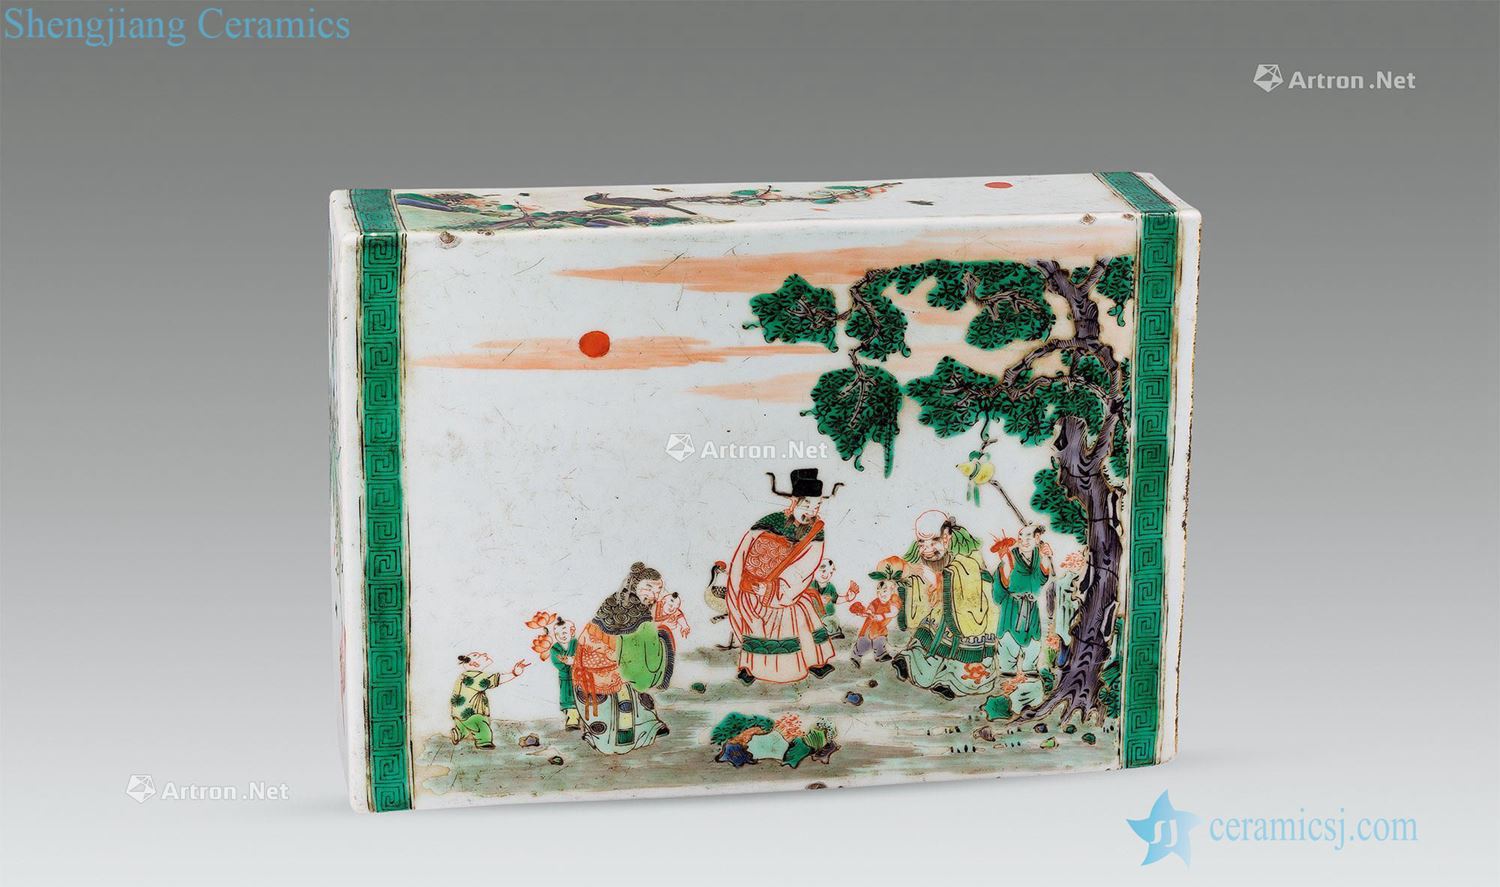 Ceramic tile qing colorful characters